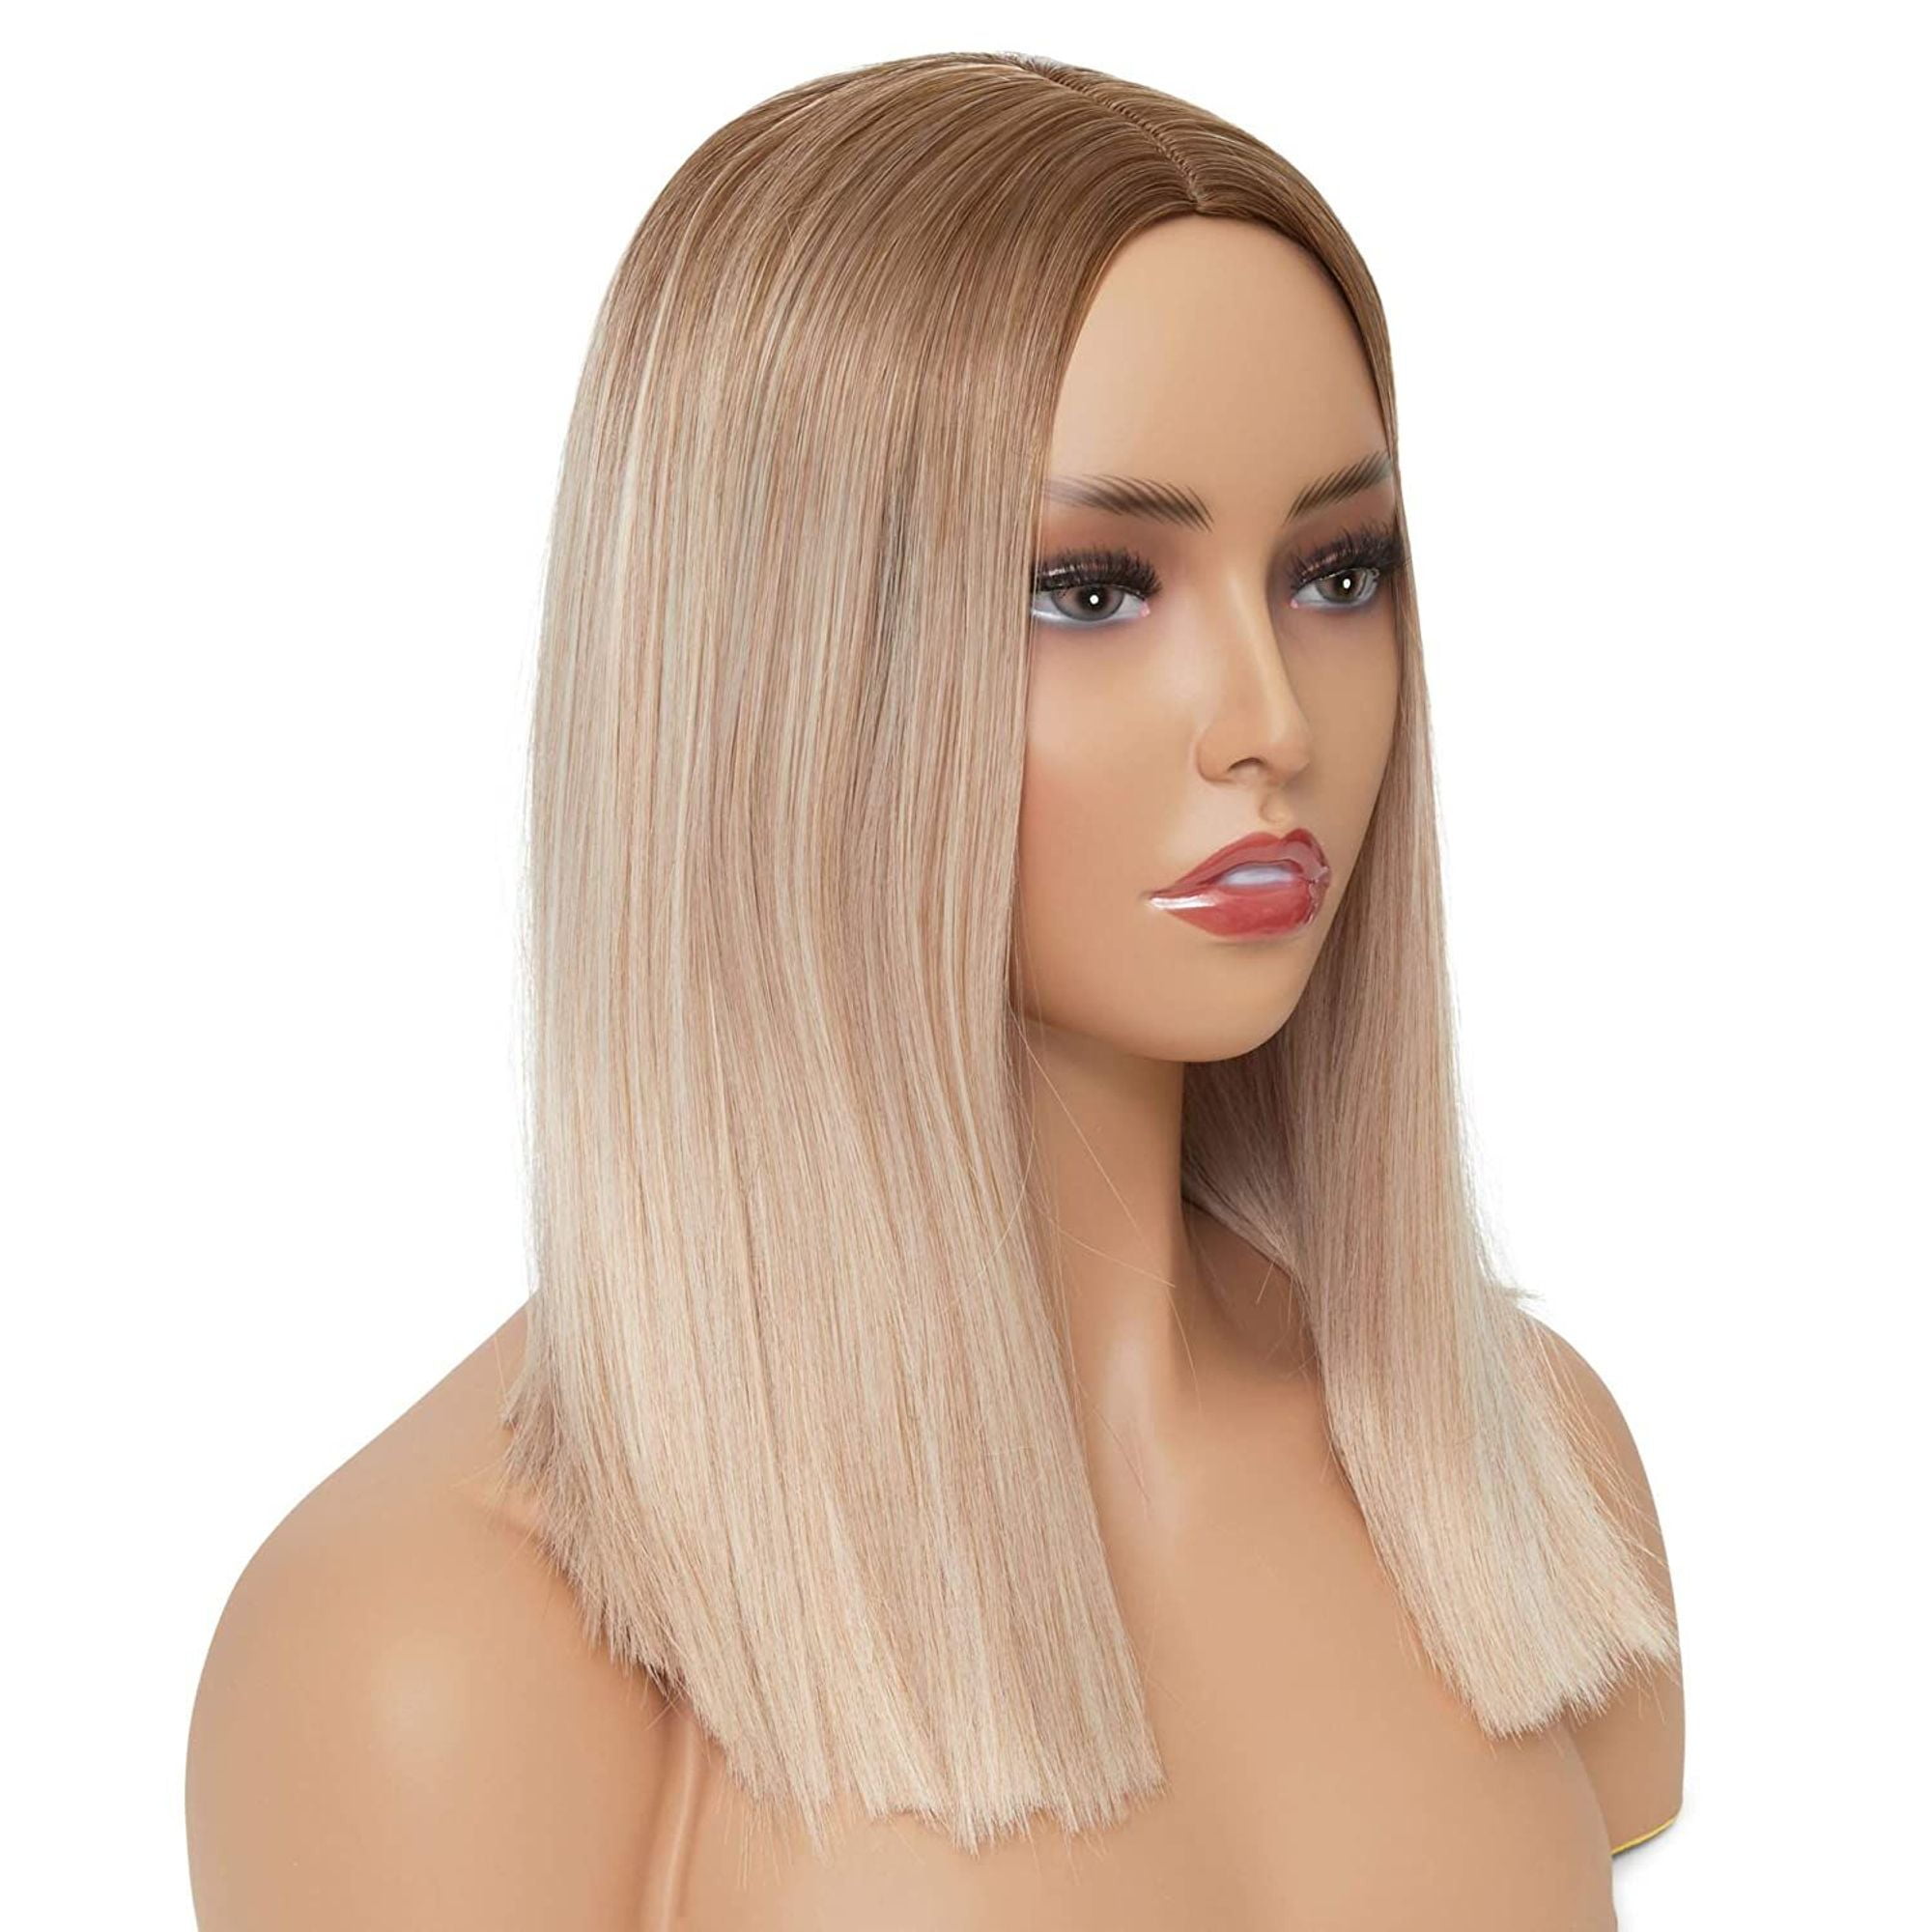 Long Straight Hair Wig With Middle Part For Women Ombre Blonde